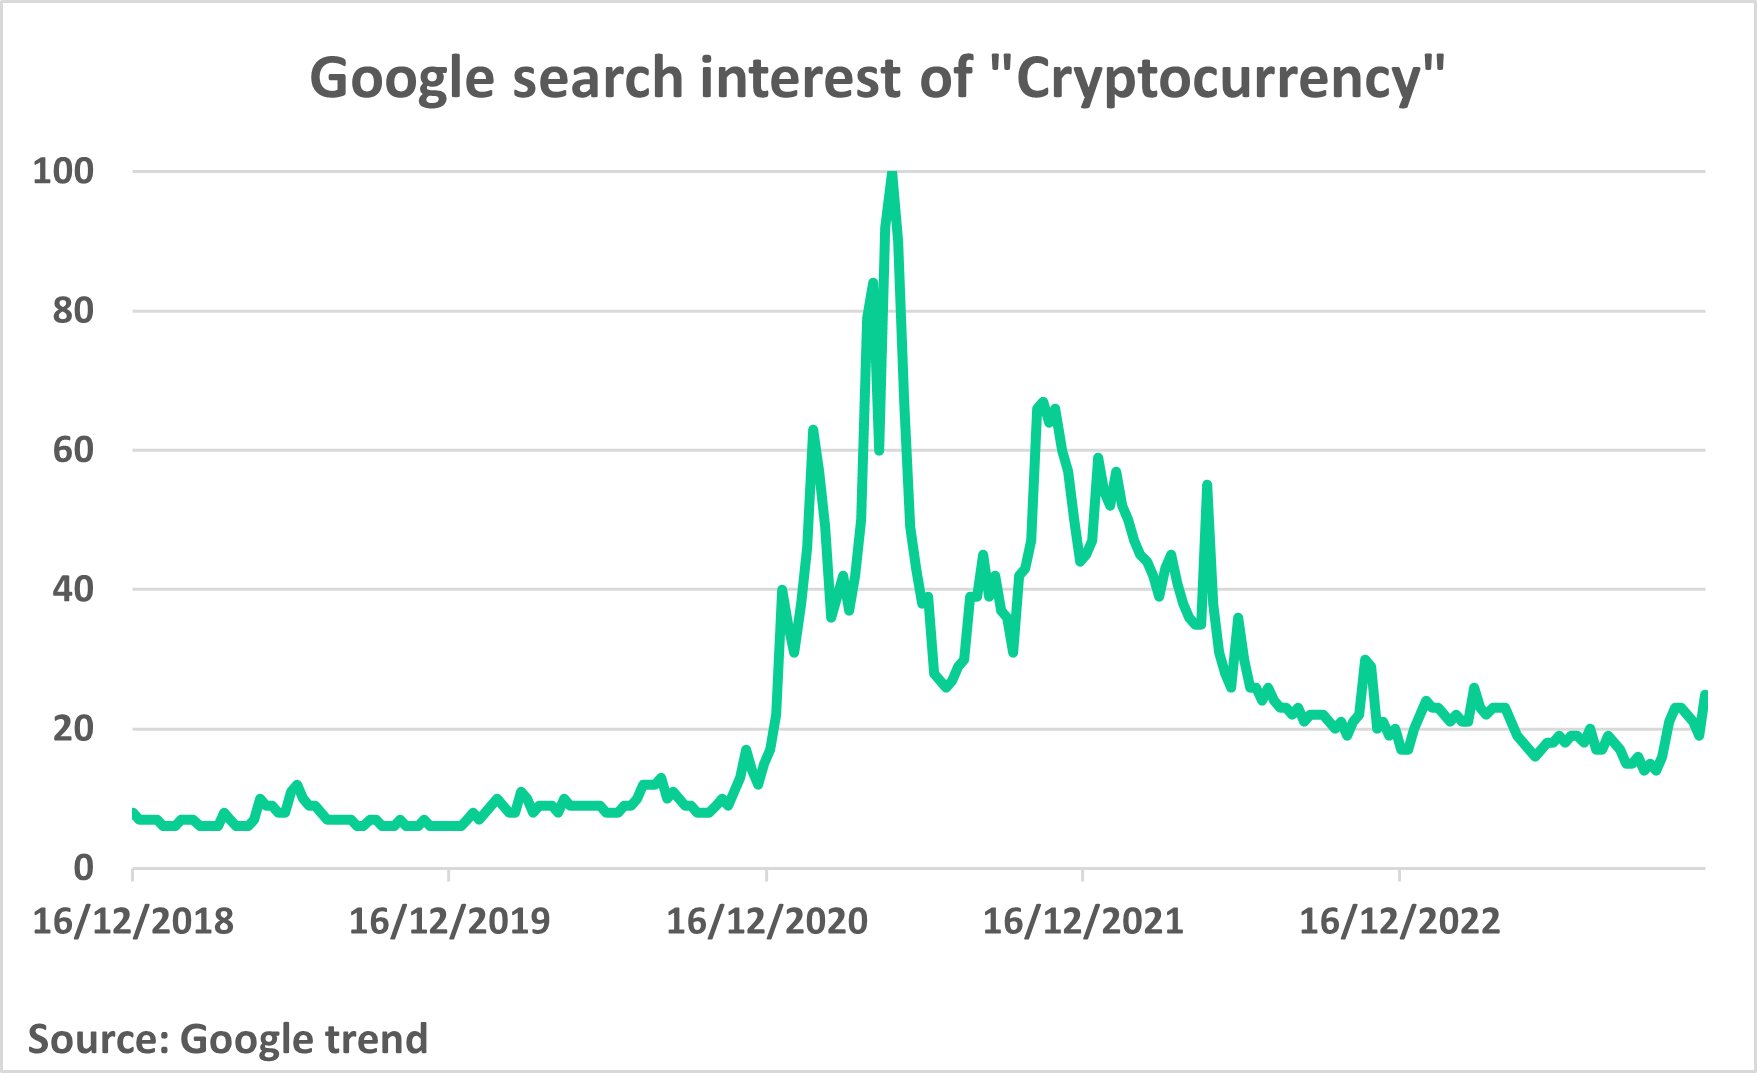 Google search interest of Cryptocurrency